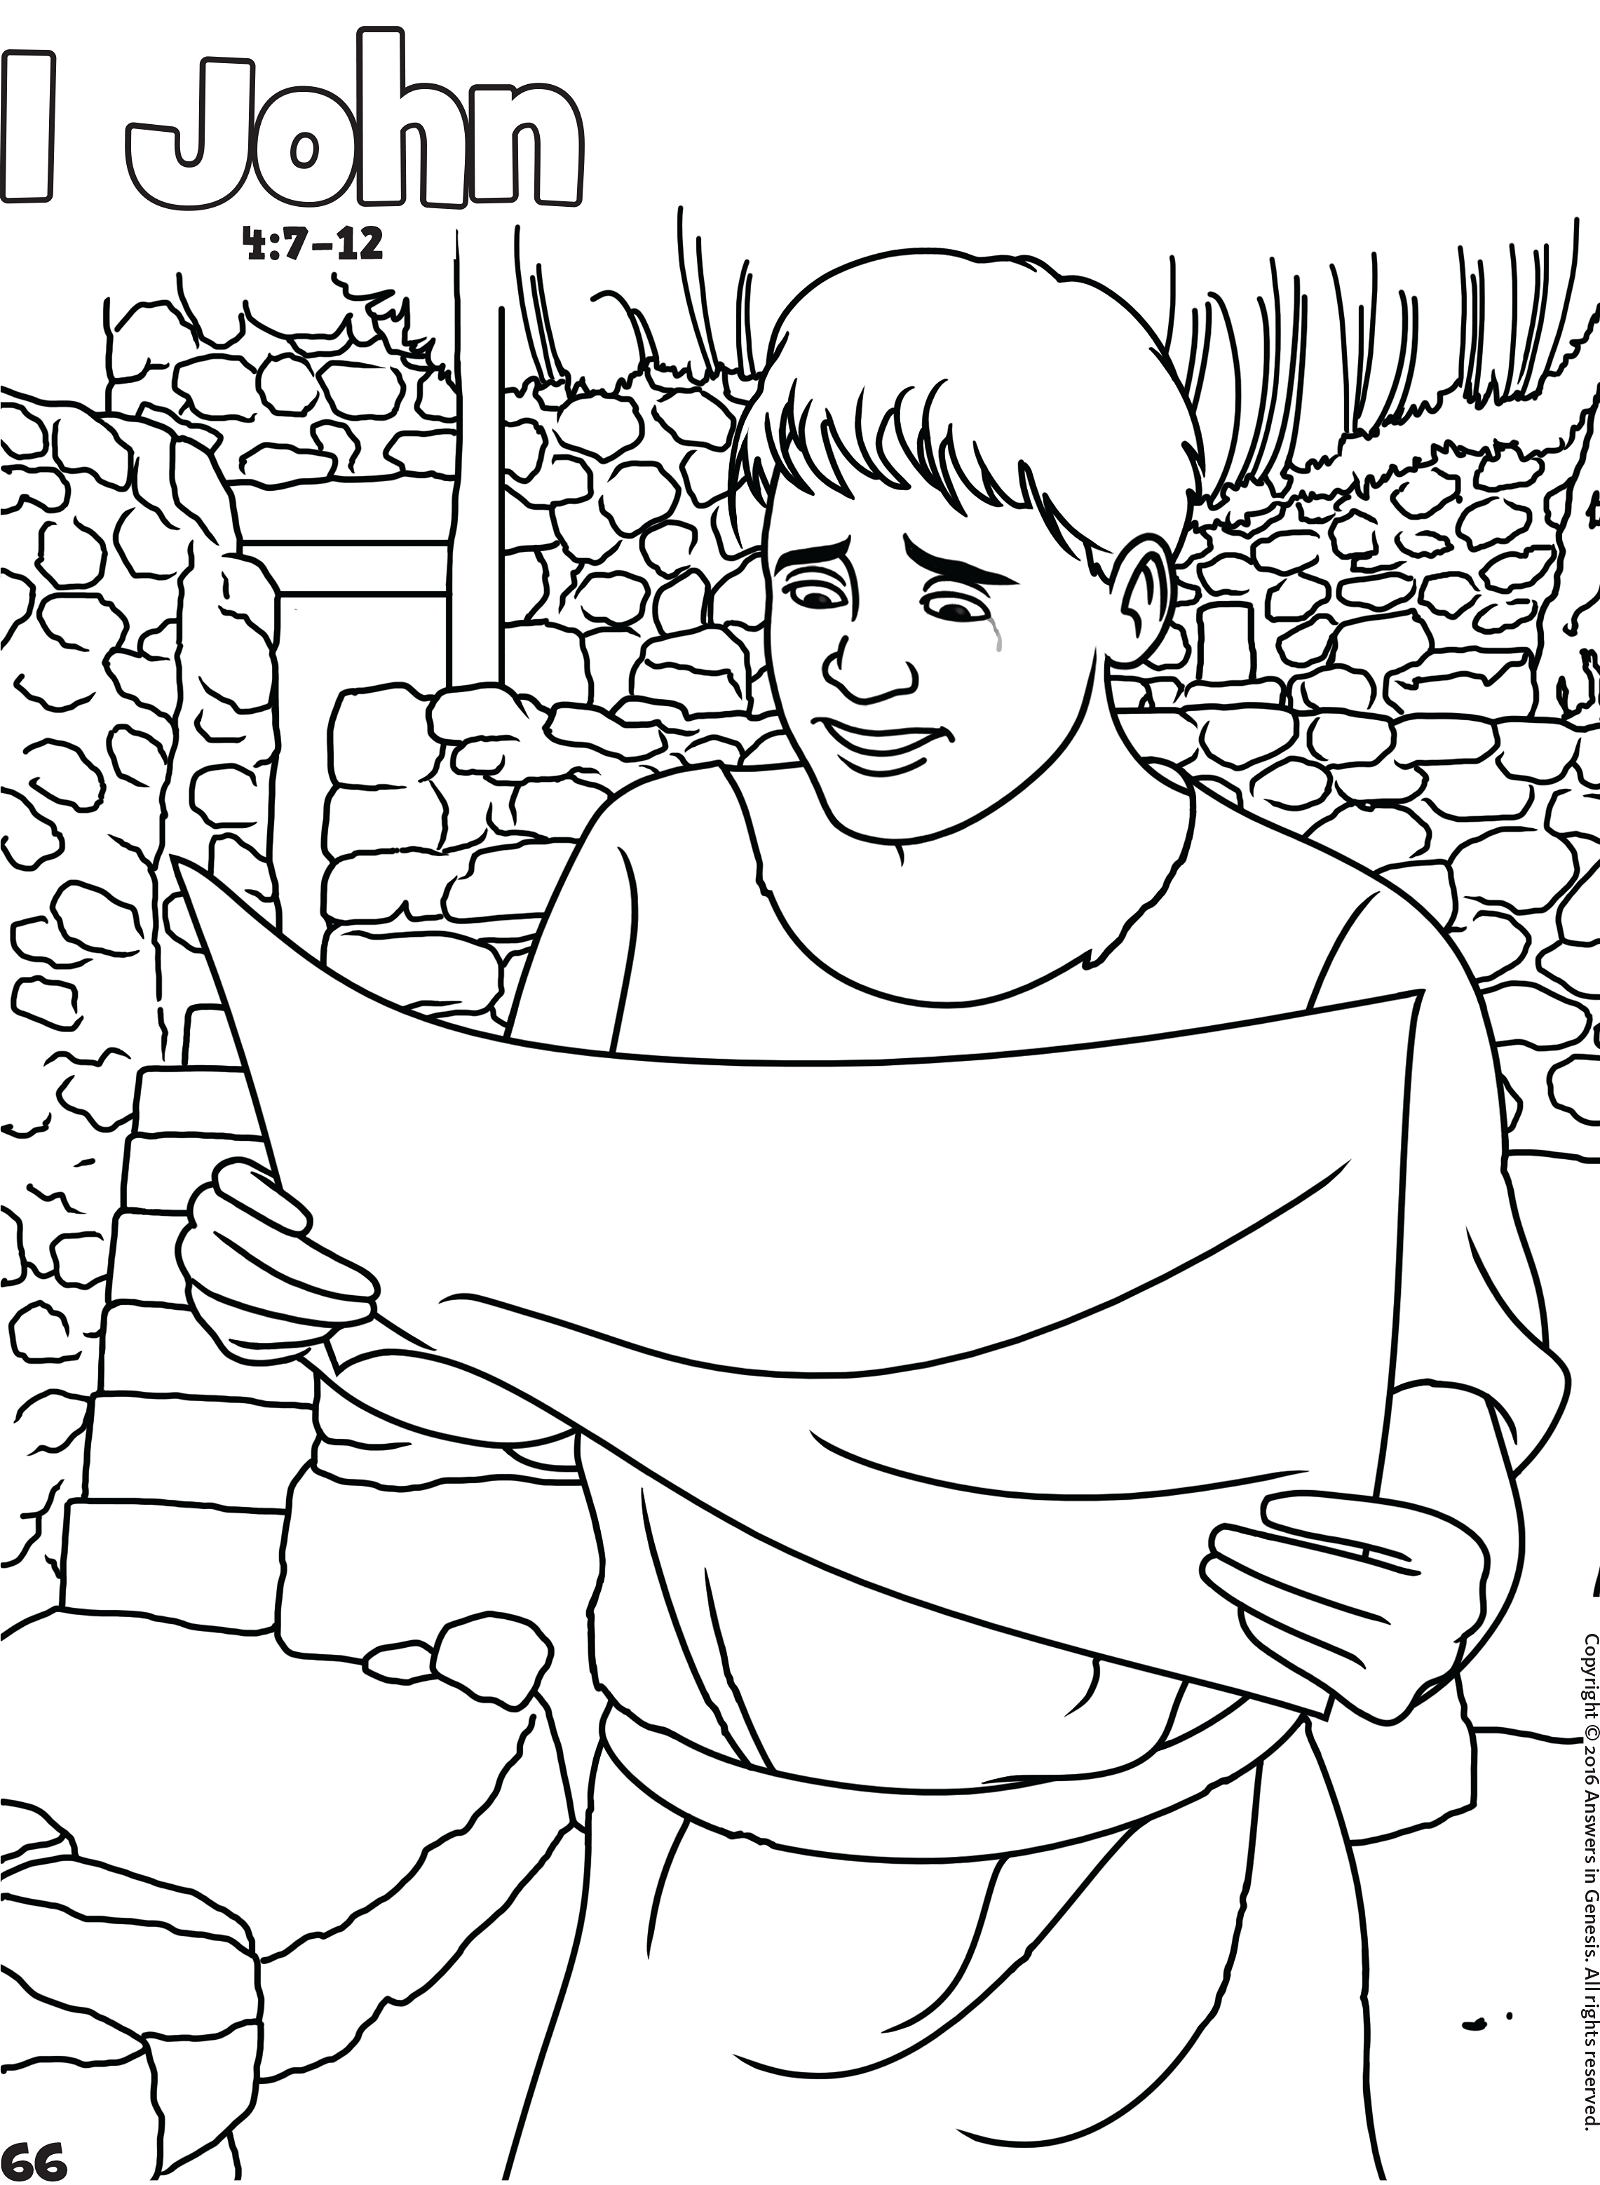 1 John: Books of the Bible Coloring (Kids Coloring Activity) | Kids Answers